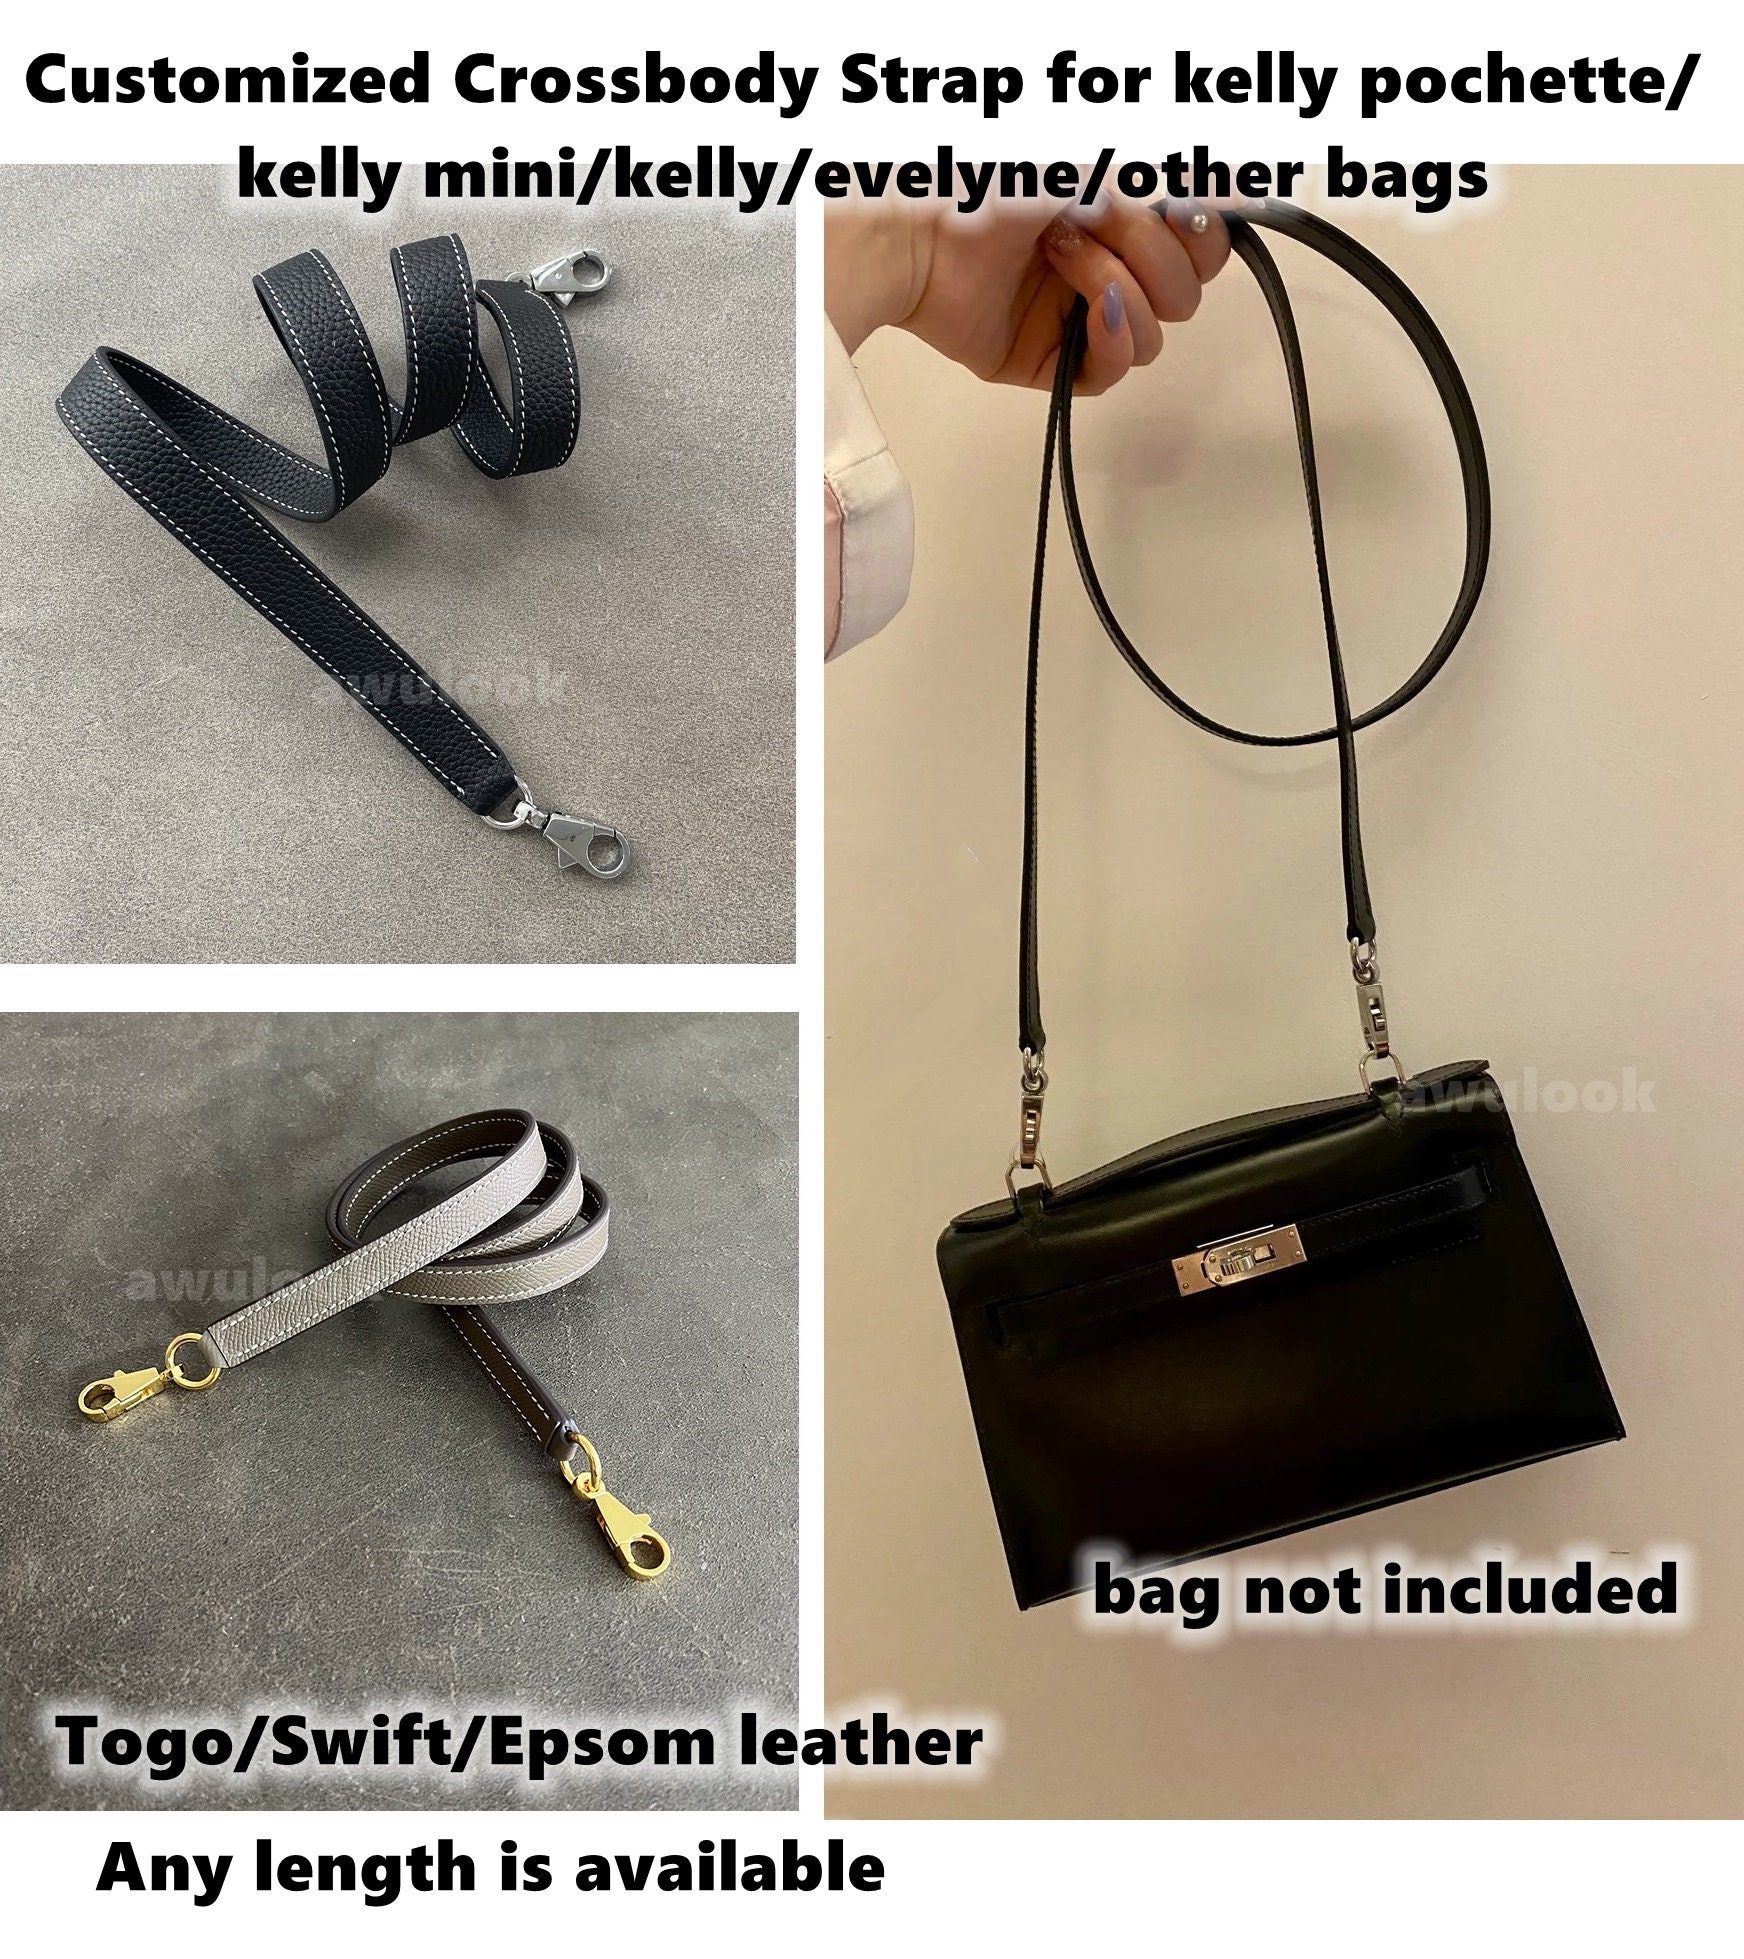 Basic Differences Between Togo & Epsom  Leather, Leather travel bag, Togo  leather